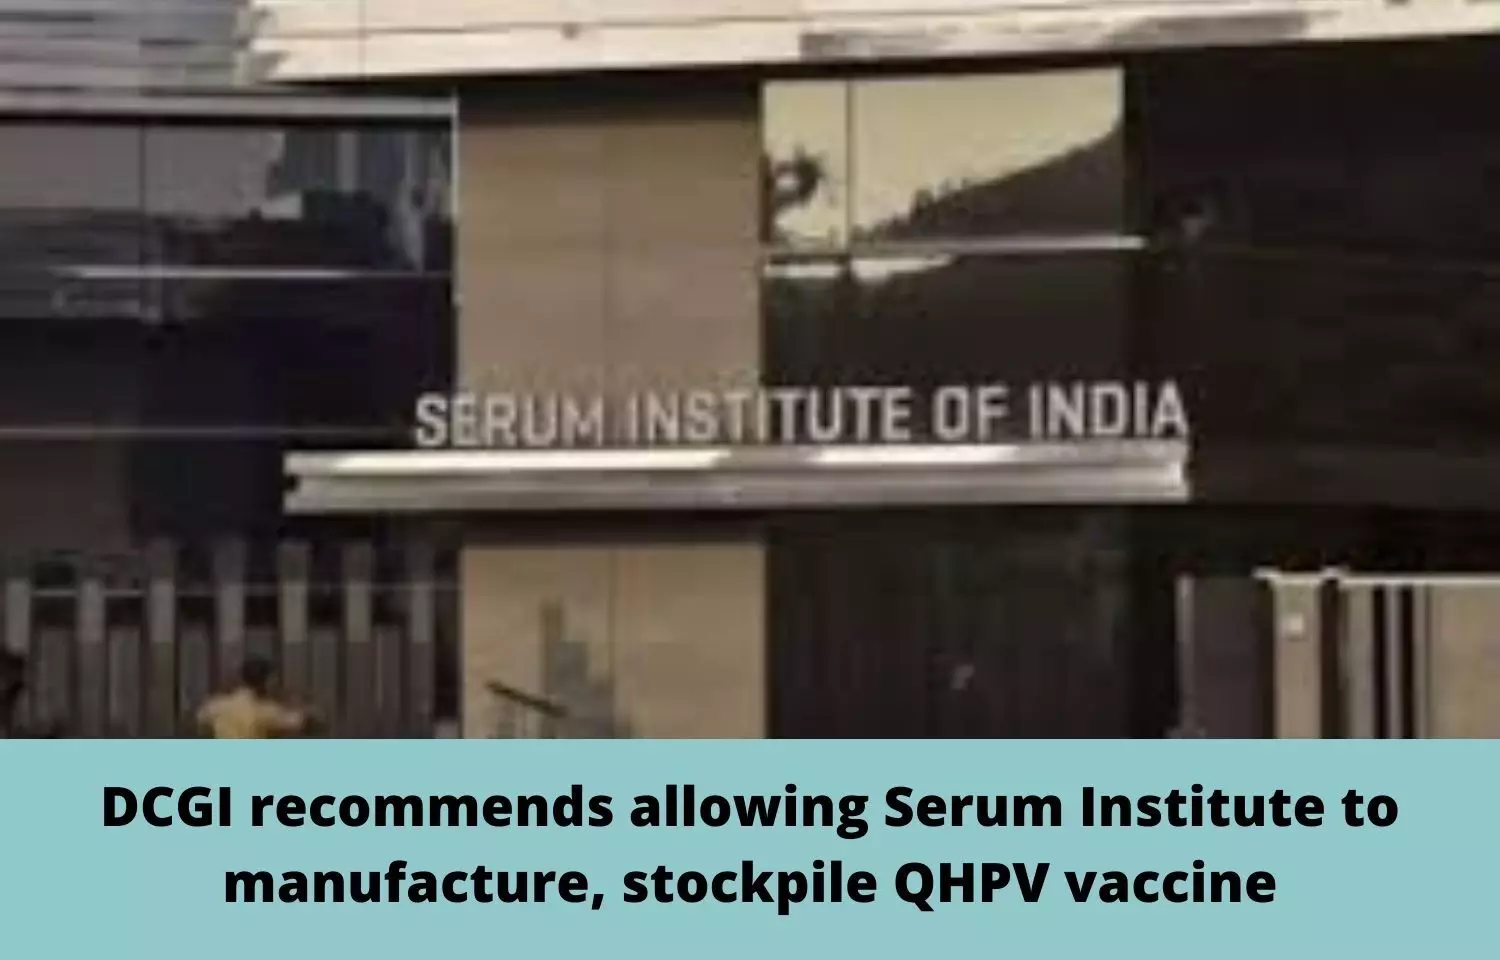 DCGI recommends allowing Serum Institute to manufacture, stockpile QHPV vaccine